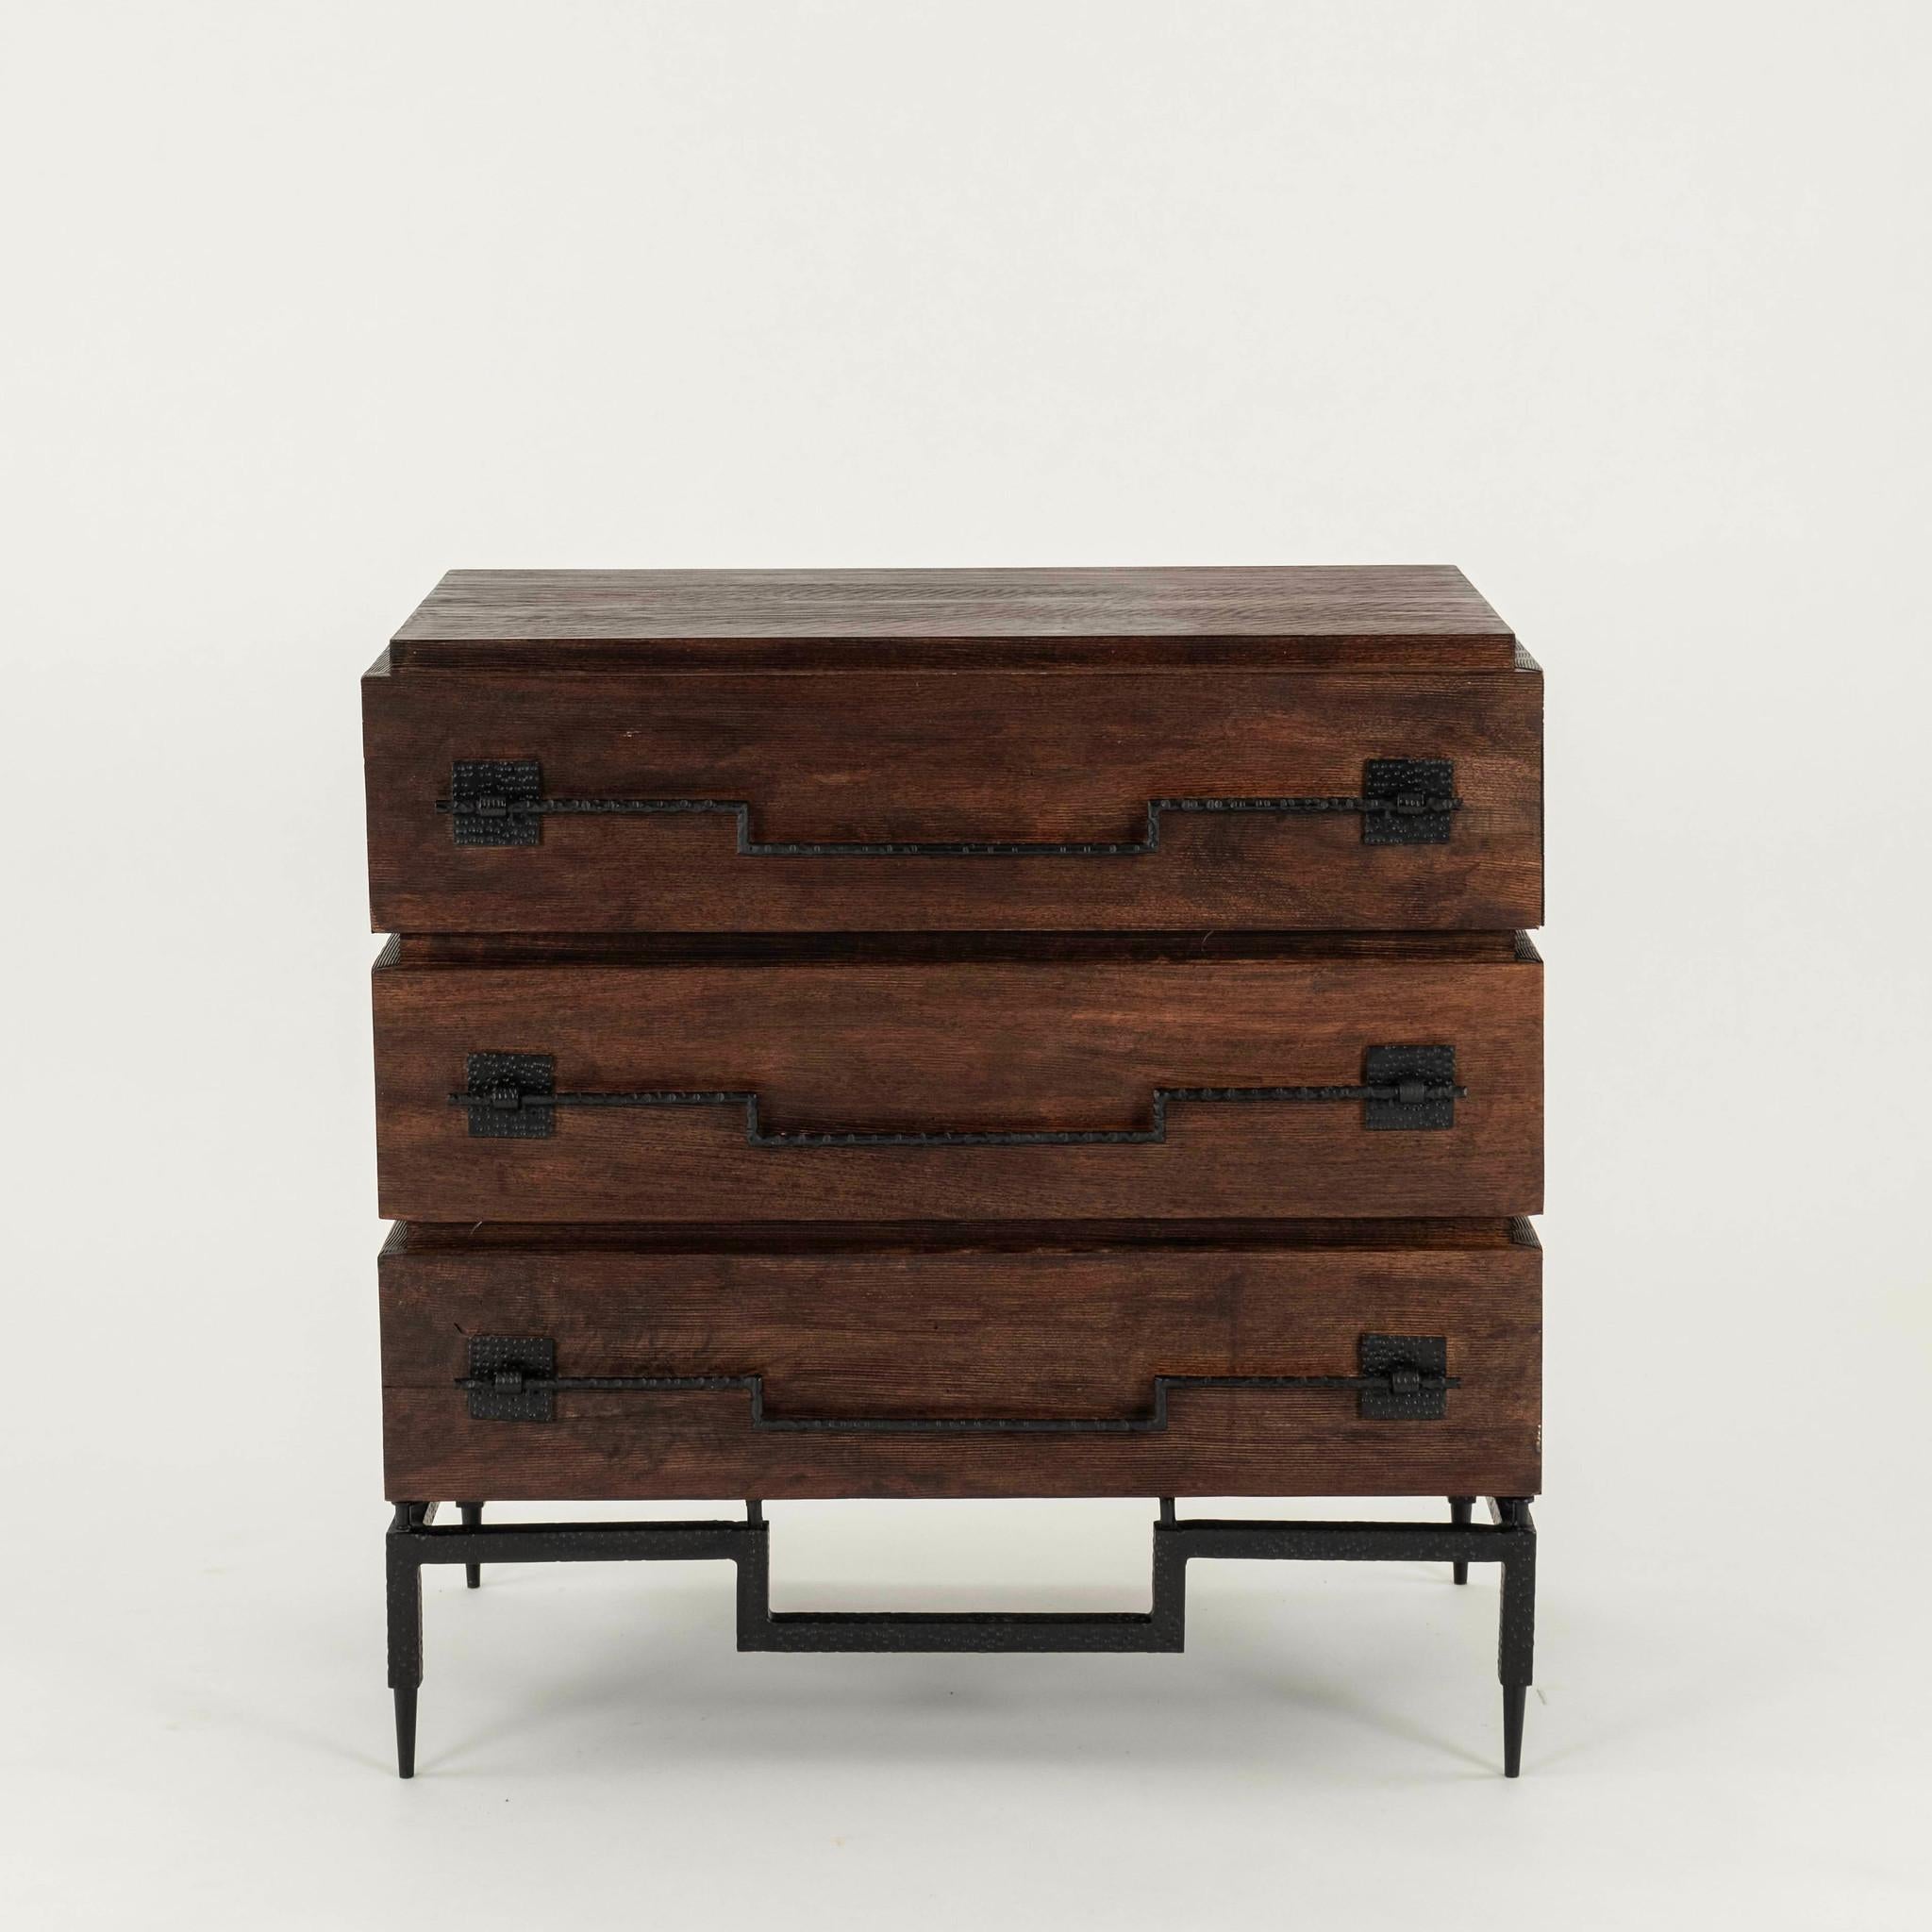 Pair of handsome mango hardwood three drawer chests in a rich dark brown finish with wrought iron base and long hardware pulls.